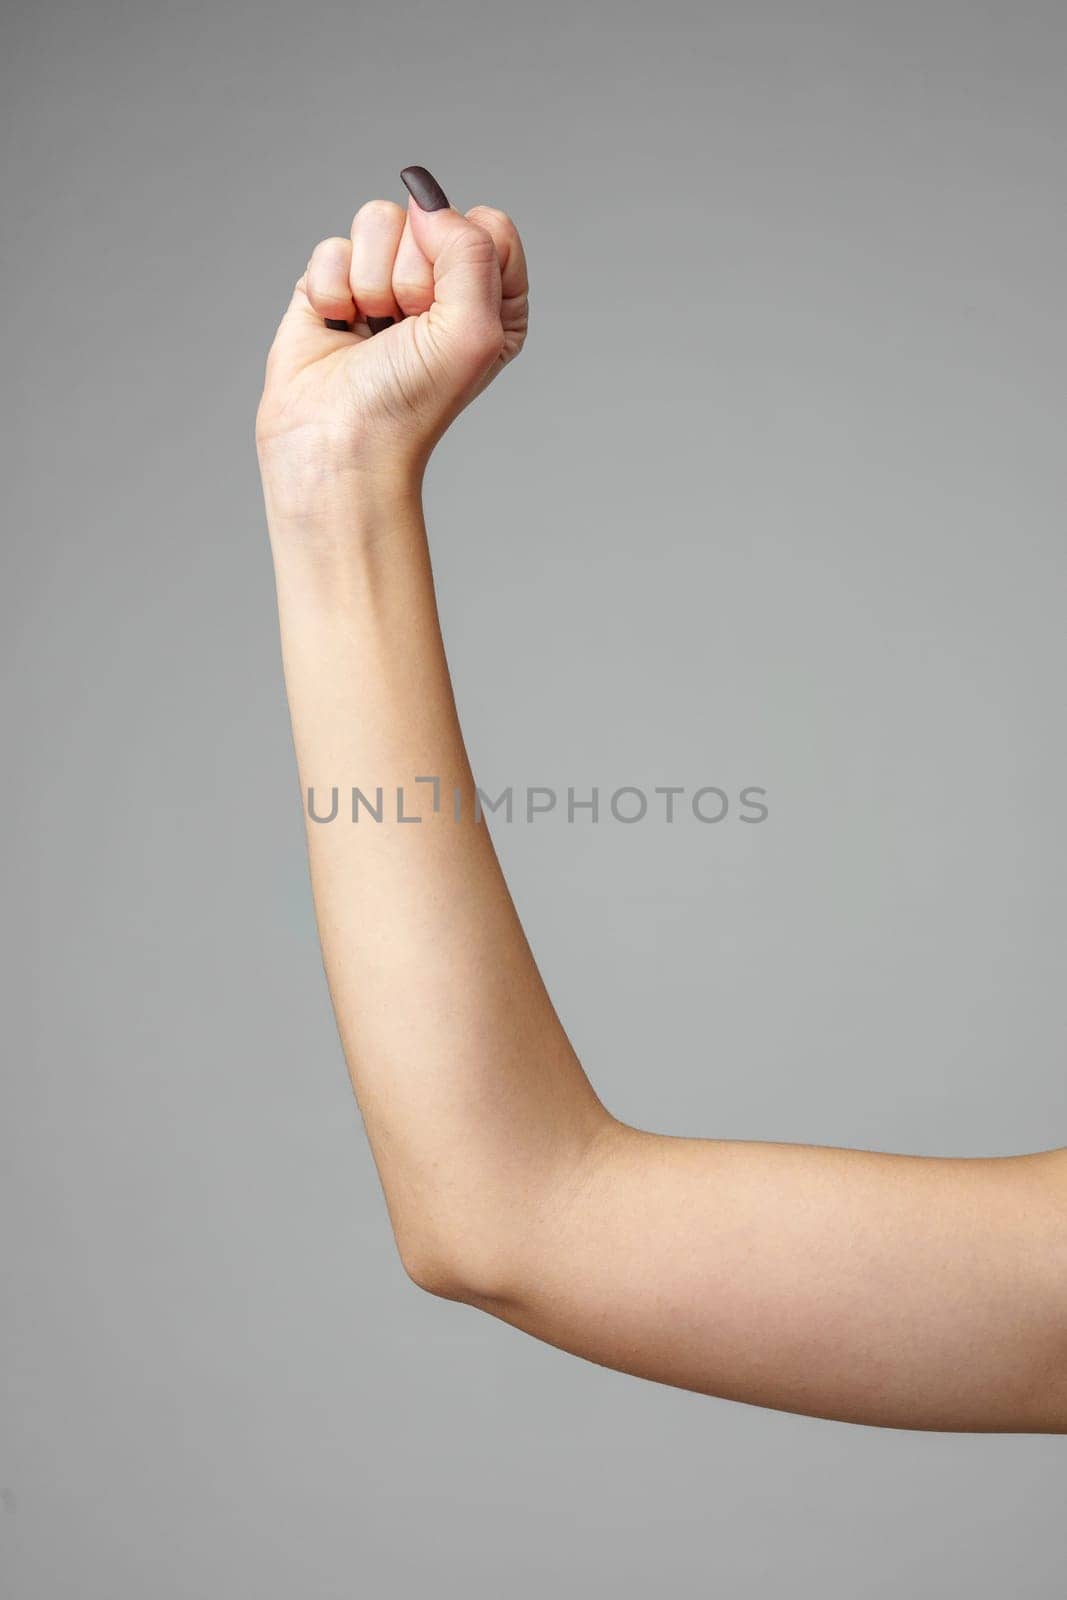 A single human arm is raised in a clenched fist, symbolizing determination, strength, and unity. The arm is displayed against a neutral gray backdrop, highlighting the muscular form and skin texture. The focused composition emphasizes the power of human expression through gesture.